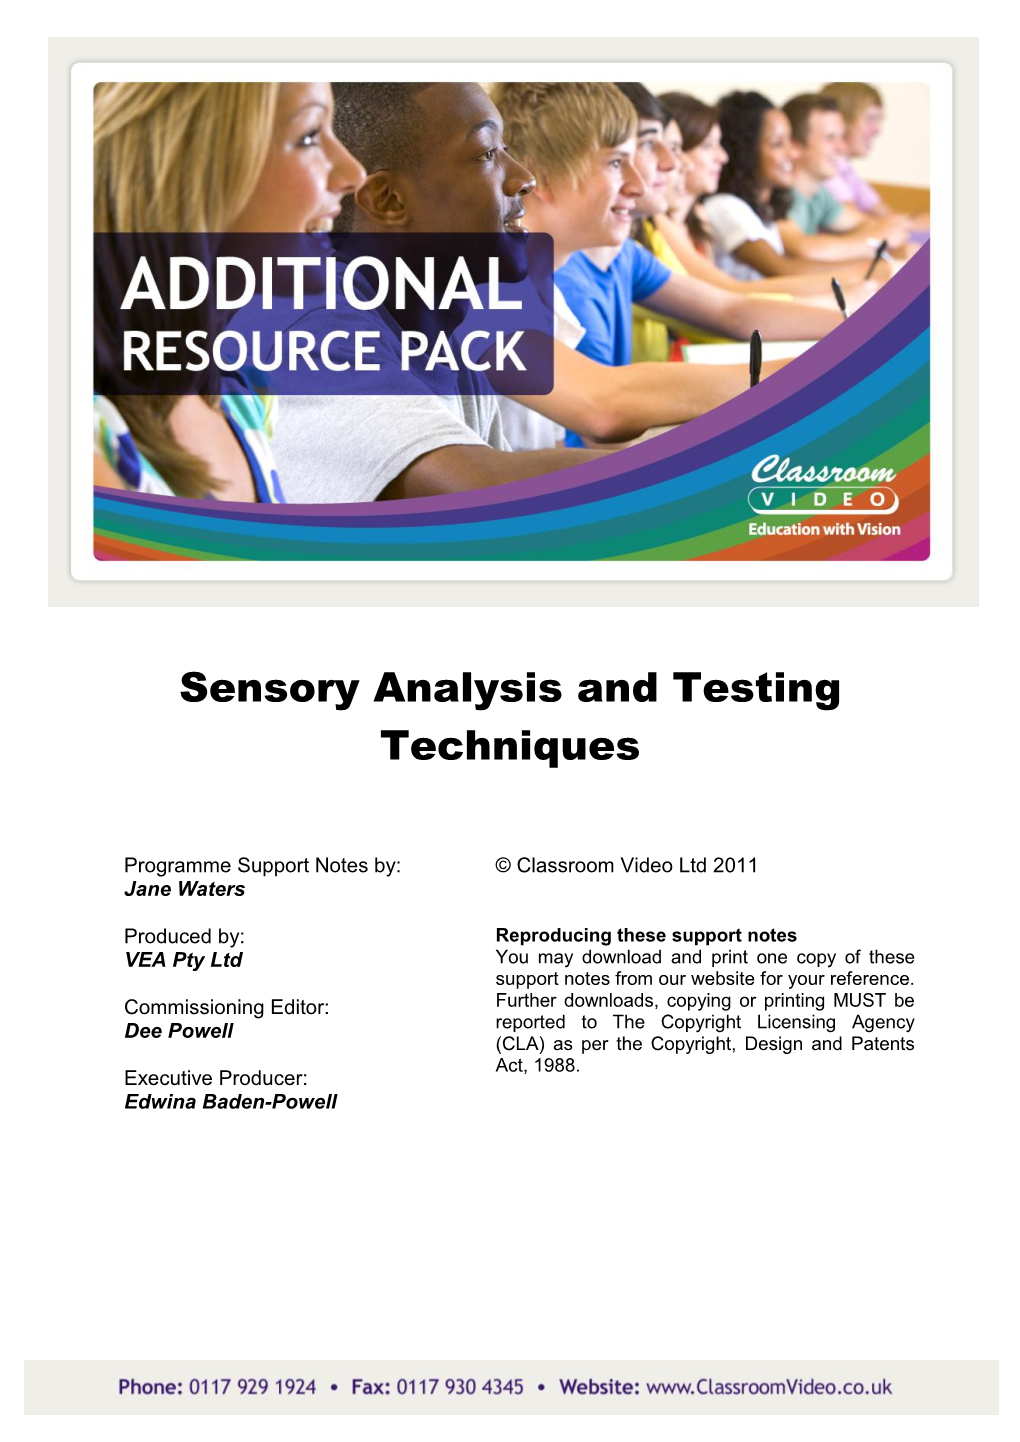 Sensory Analysis and Testing Techniques